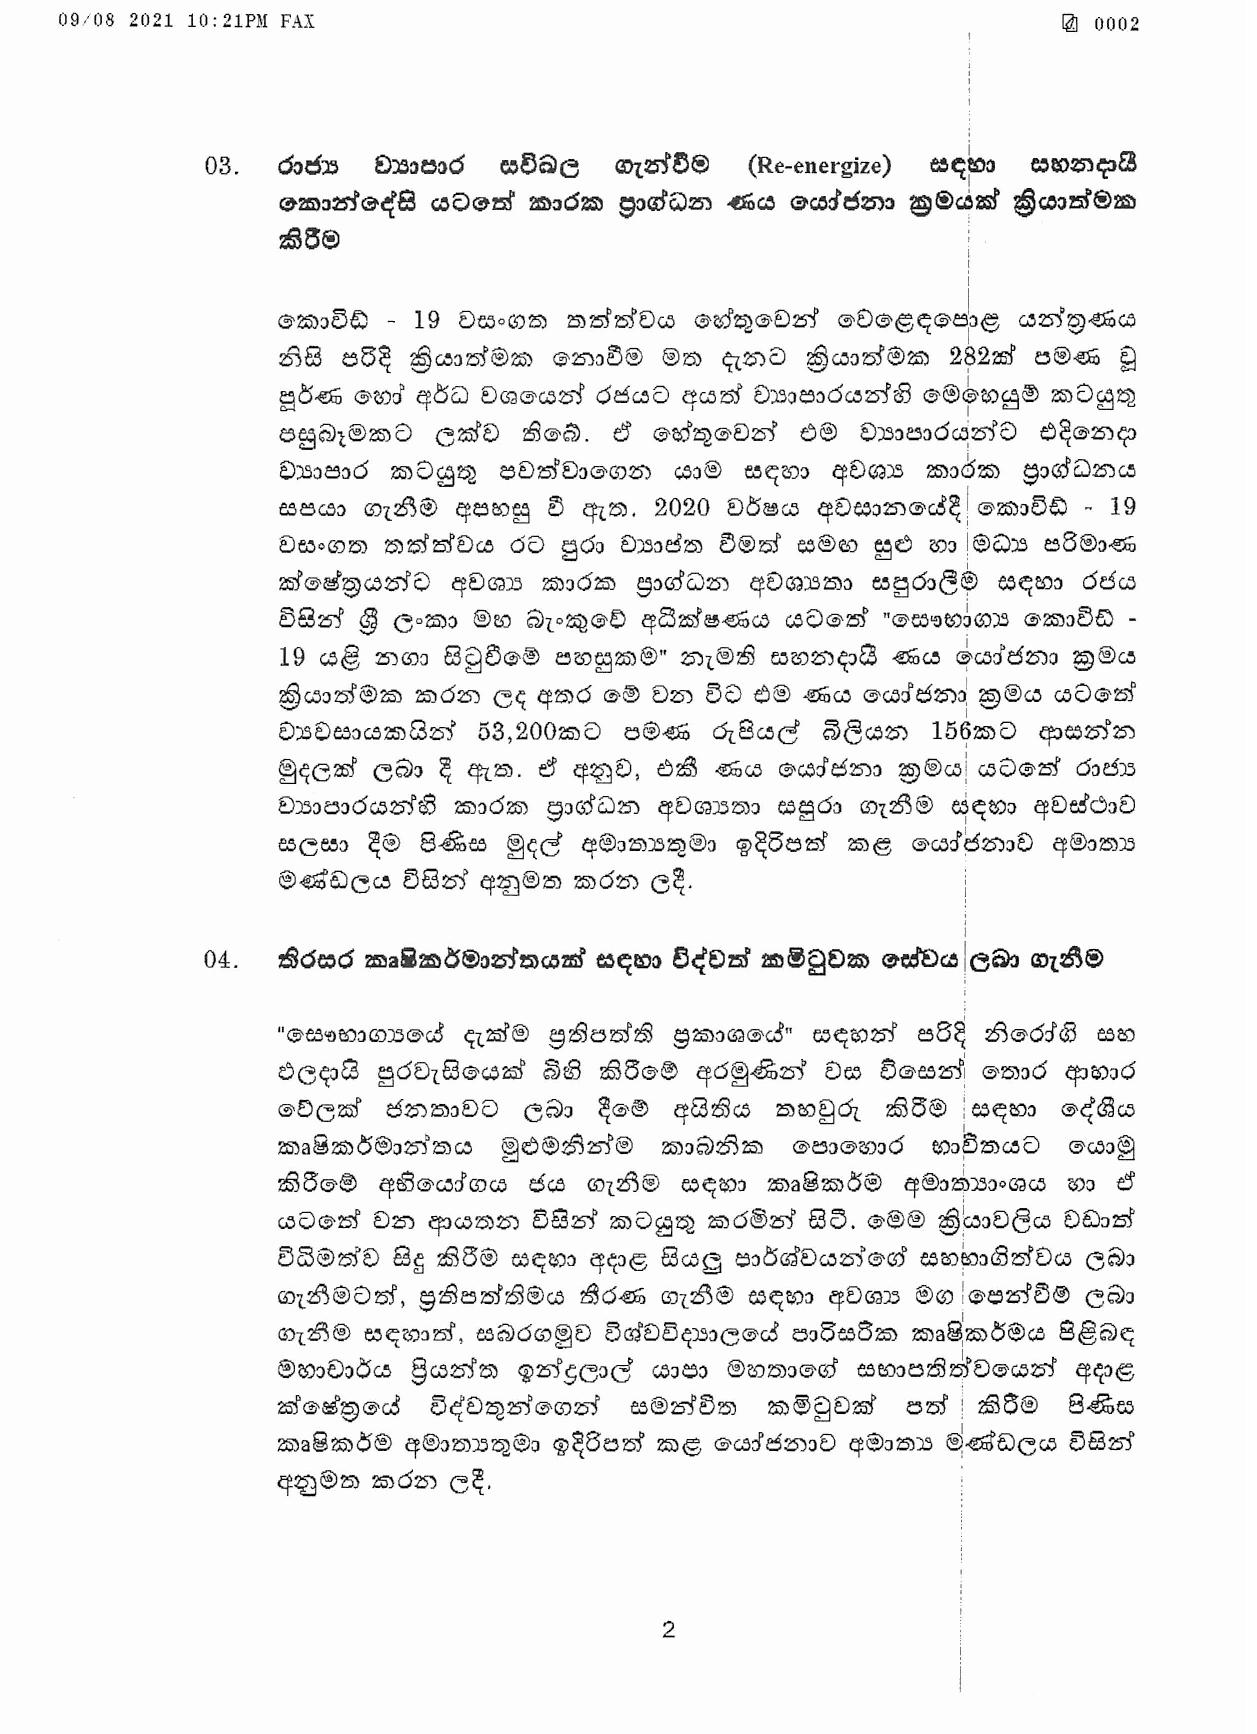 Cabinet Decision on 09.08.2021 page 002